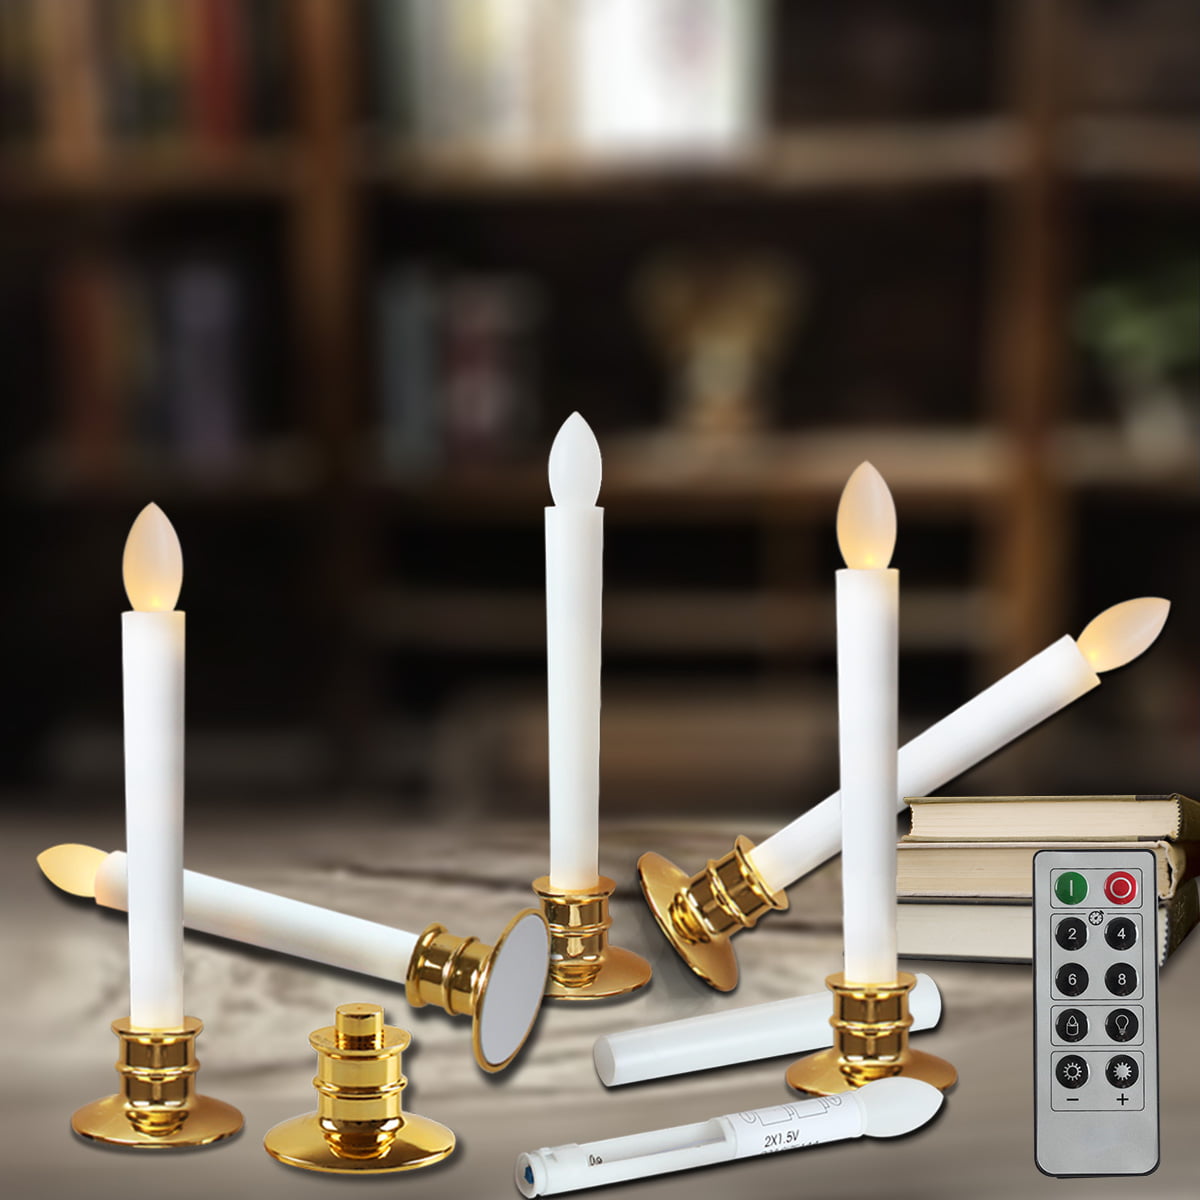 Moving Wick Battery Operated LED Window Candles 0.78 x 9.5 Inches Real Wax Amber Yellow Christmas Window Decoration Candles Set of 4 DRomance Remote White Flameless Taper Candles with Timer 